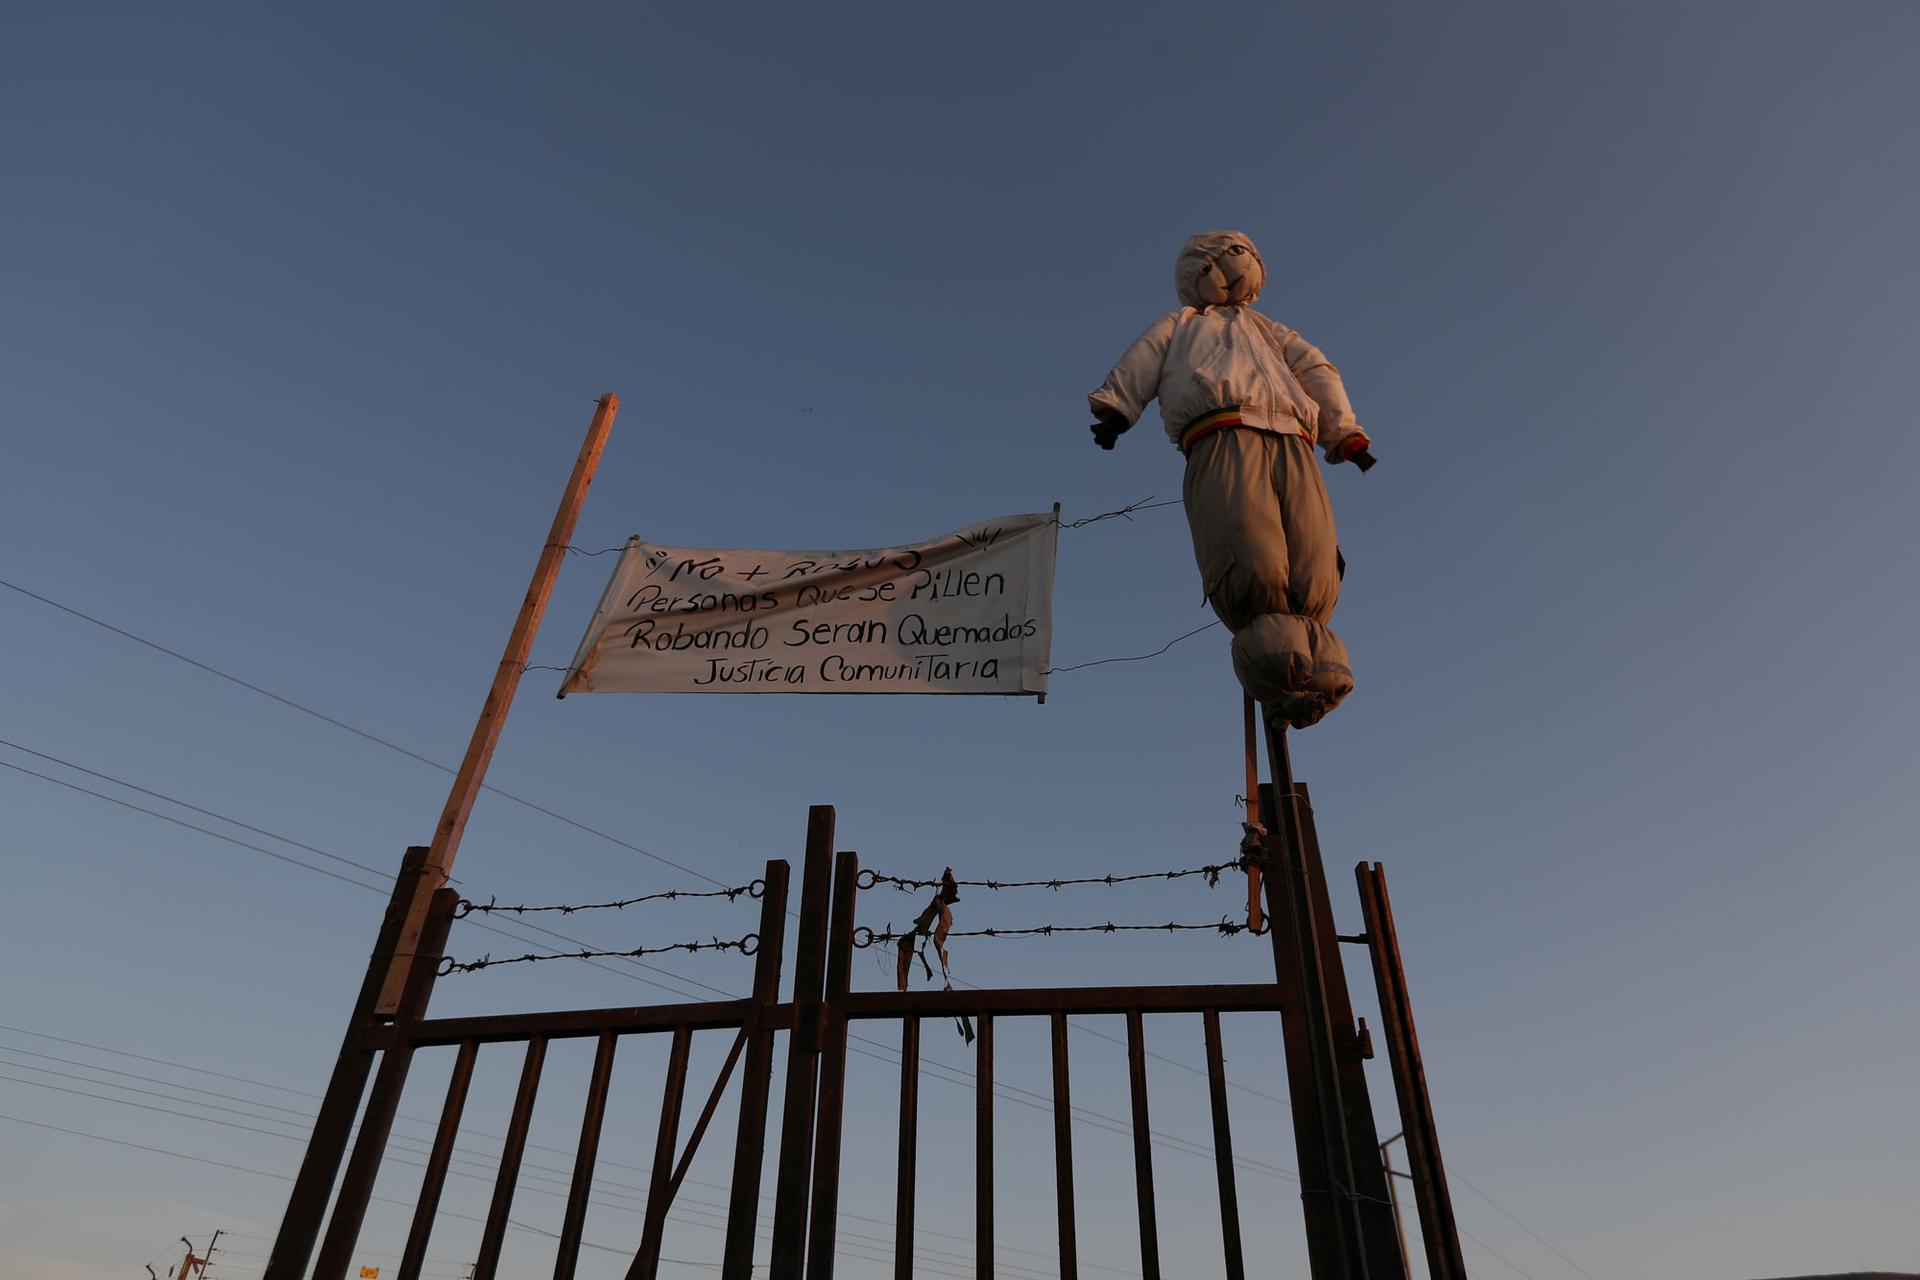 A stuffed effigy is shown hangs at a fence with barbed wire and a sign reading “No more robberies. People caught stealing will be burned. Community justice.”